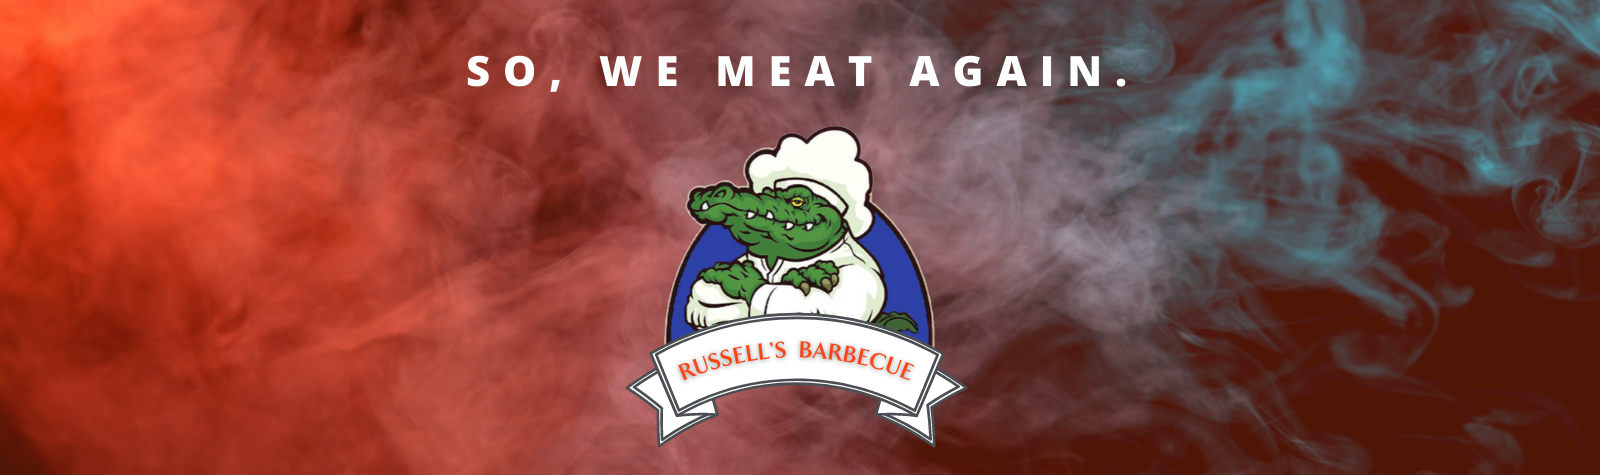 35 Stories for 35 Years: Story #30 – So, We Meat Again: The History of Russell’s Barbecue